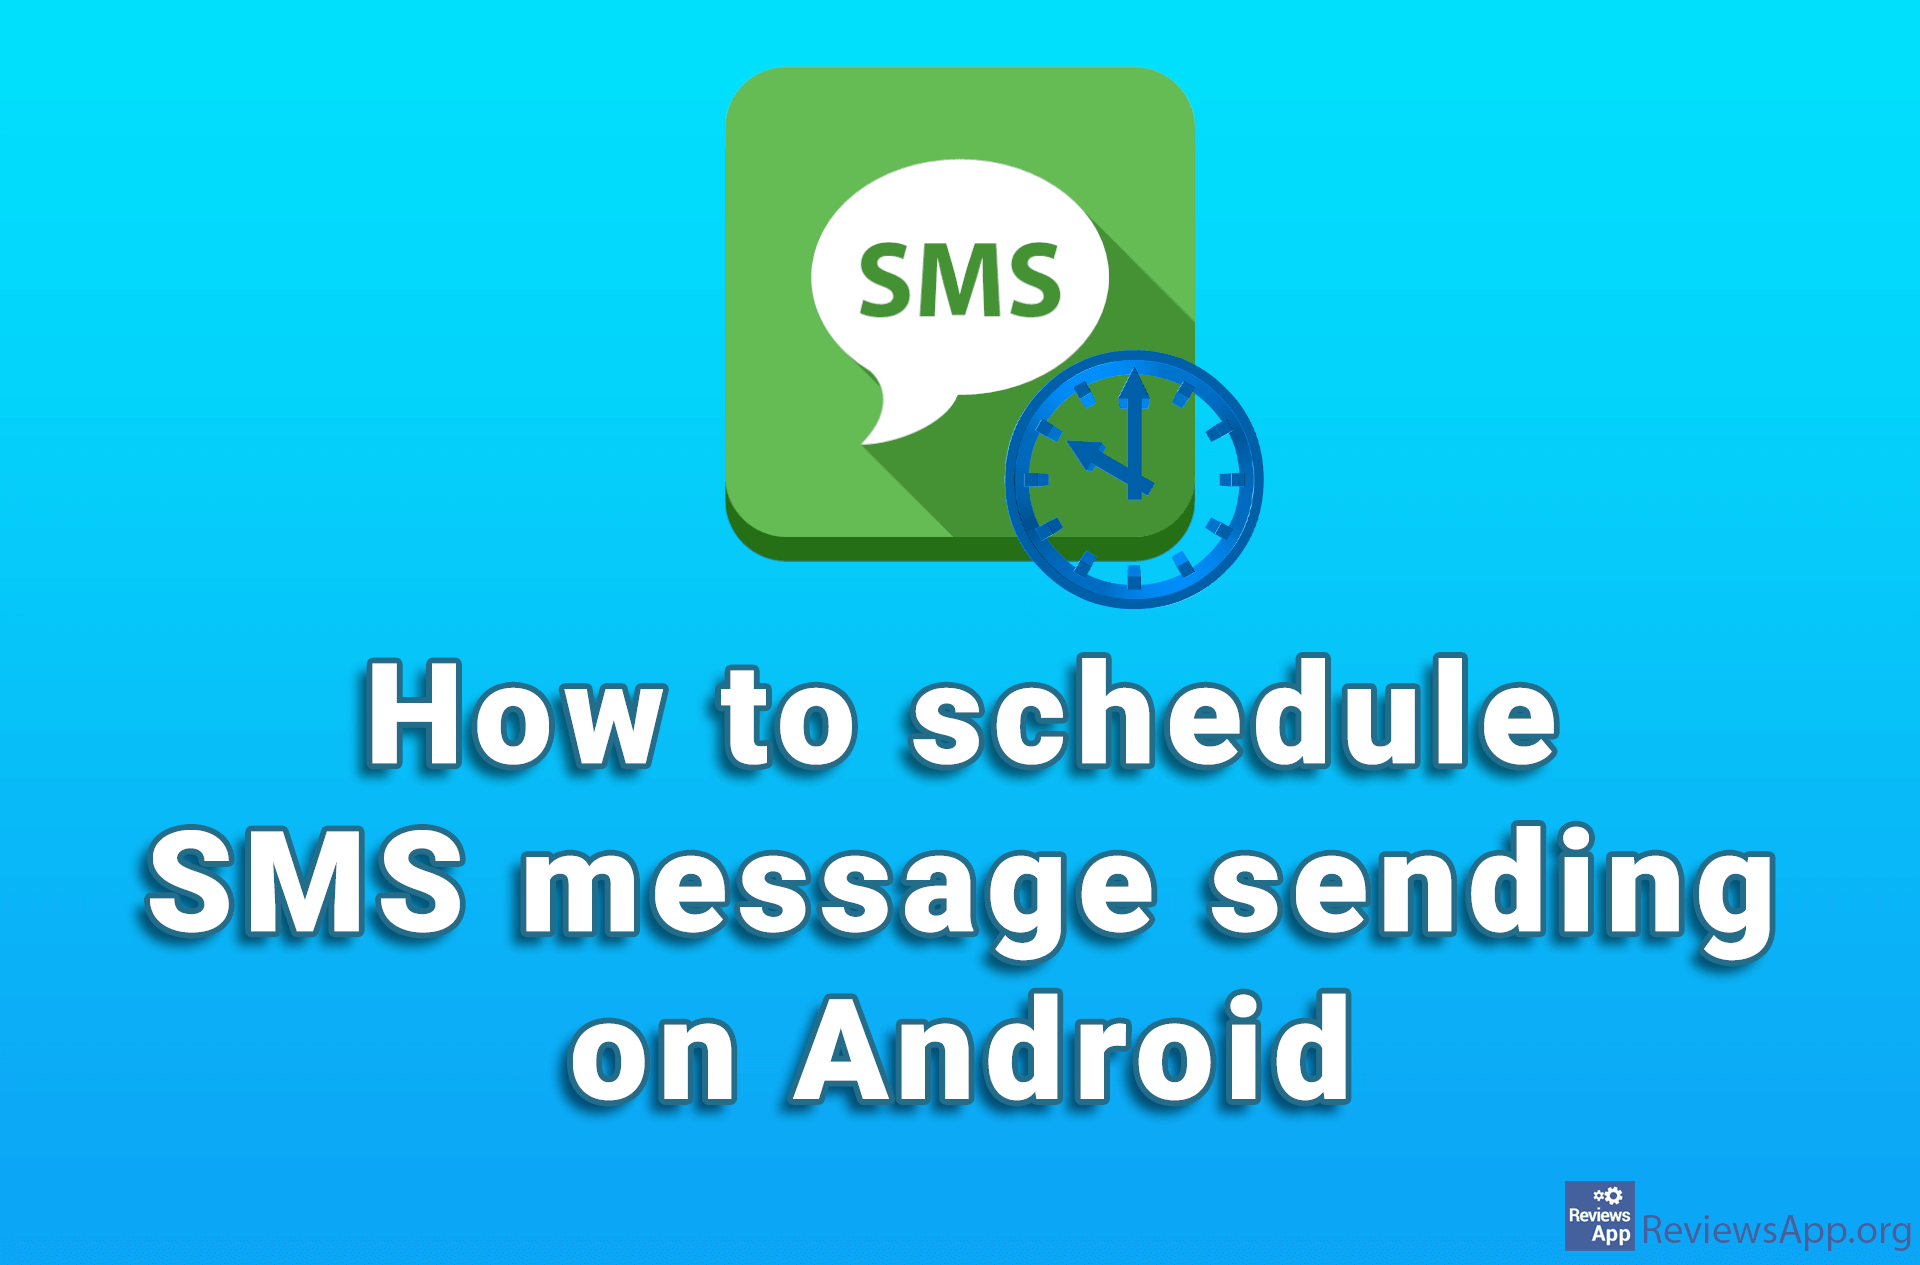 How to schedule SMS message sending on Android